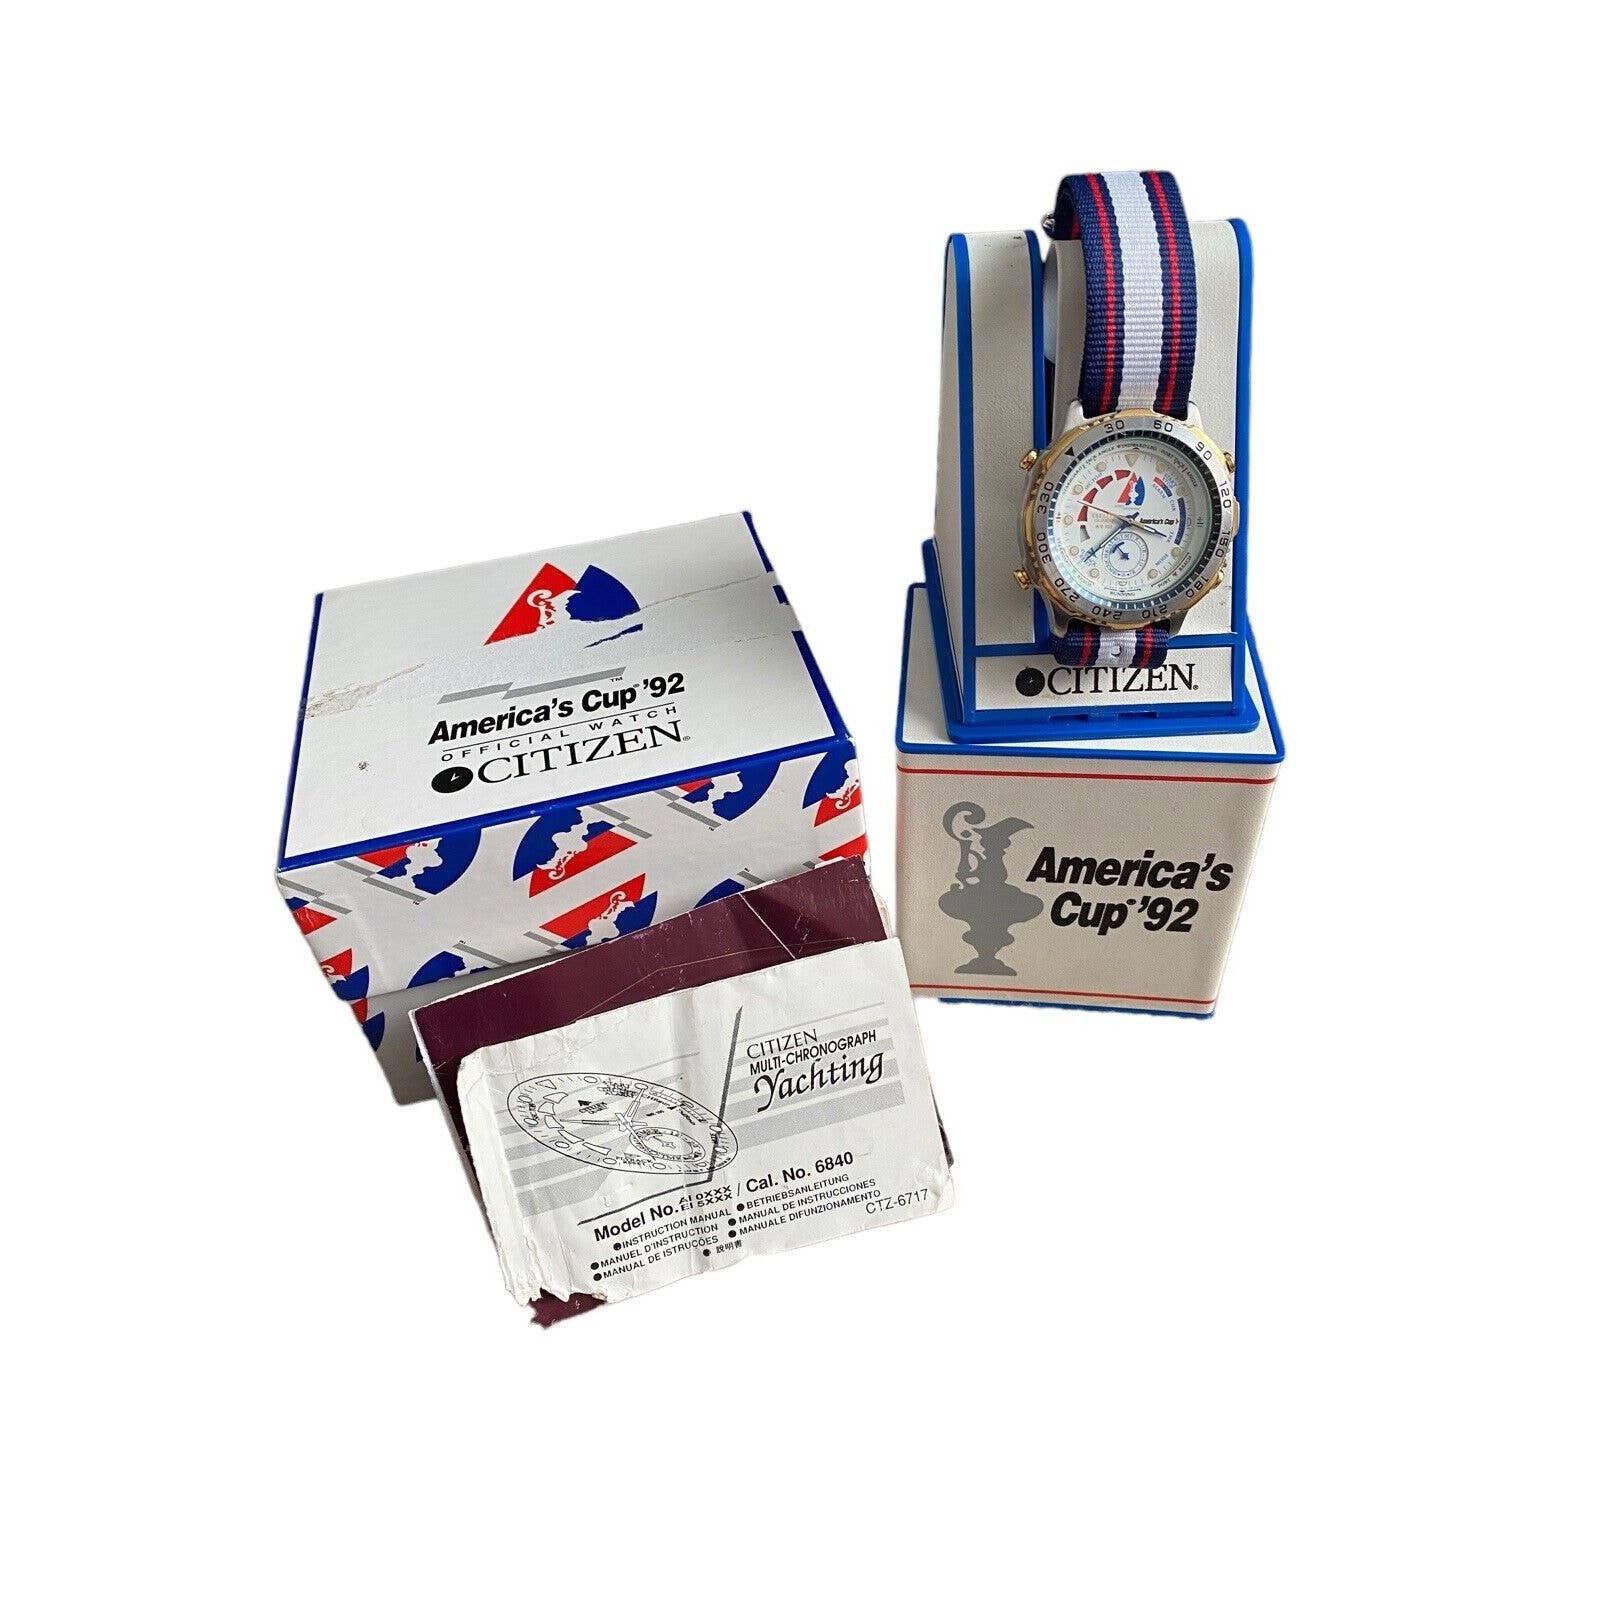 Citizen Citizen Yacht 1992 Americas Cup Watch Chronograph Race Size ONE SIZE - 2 Preview